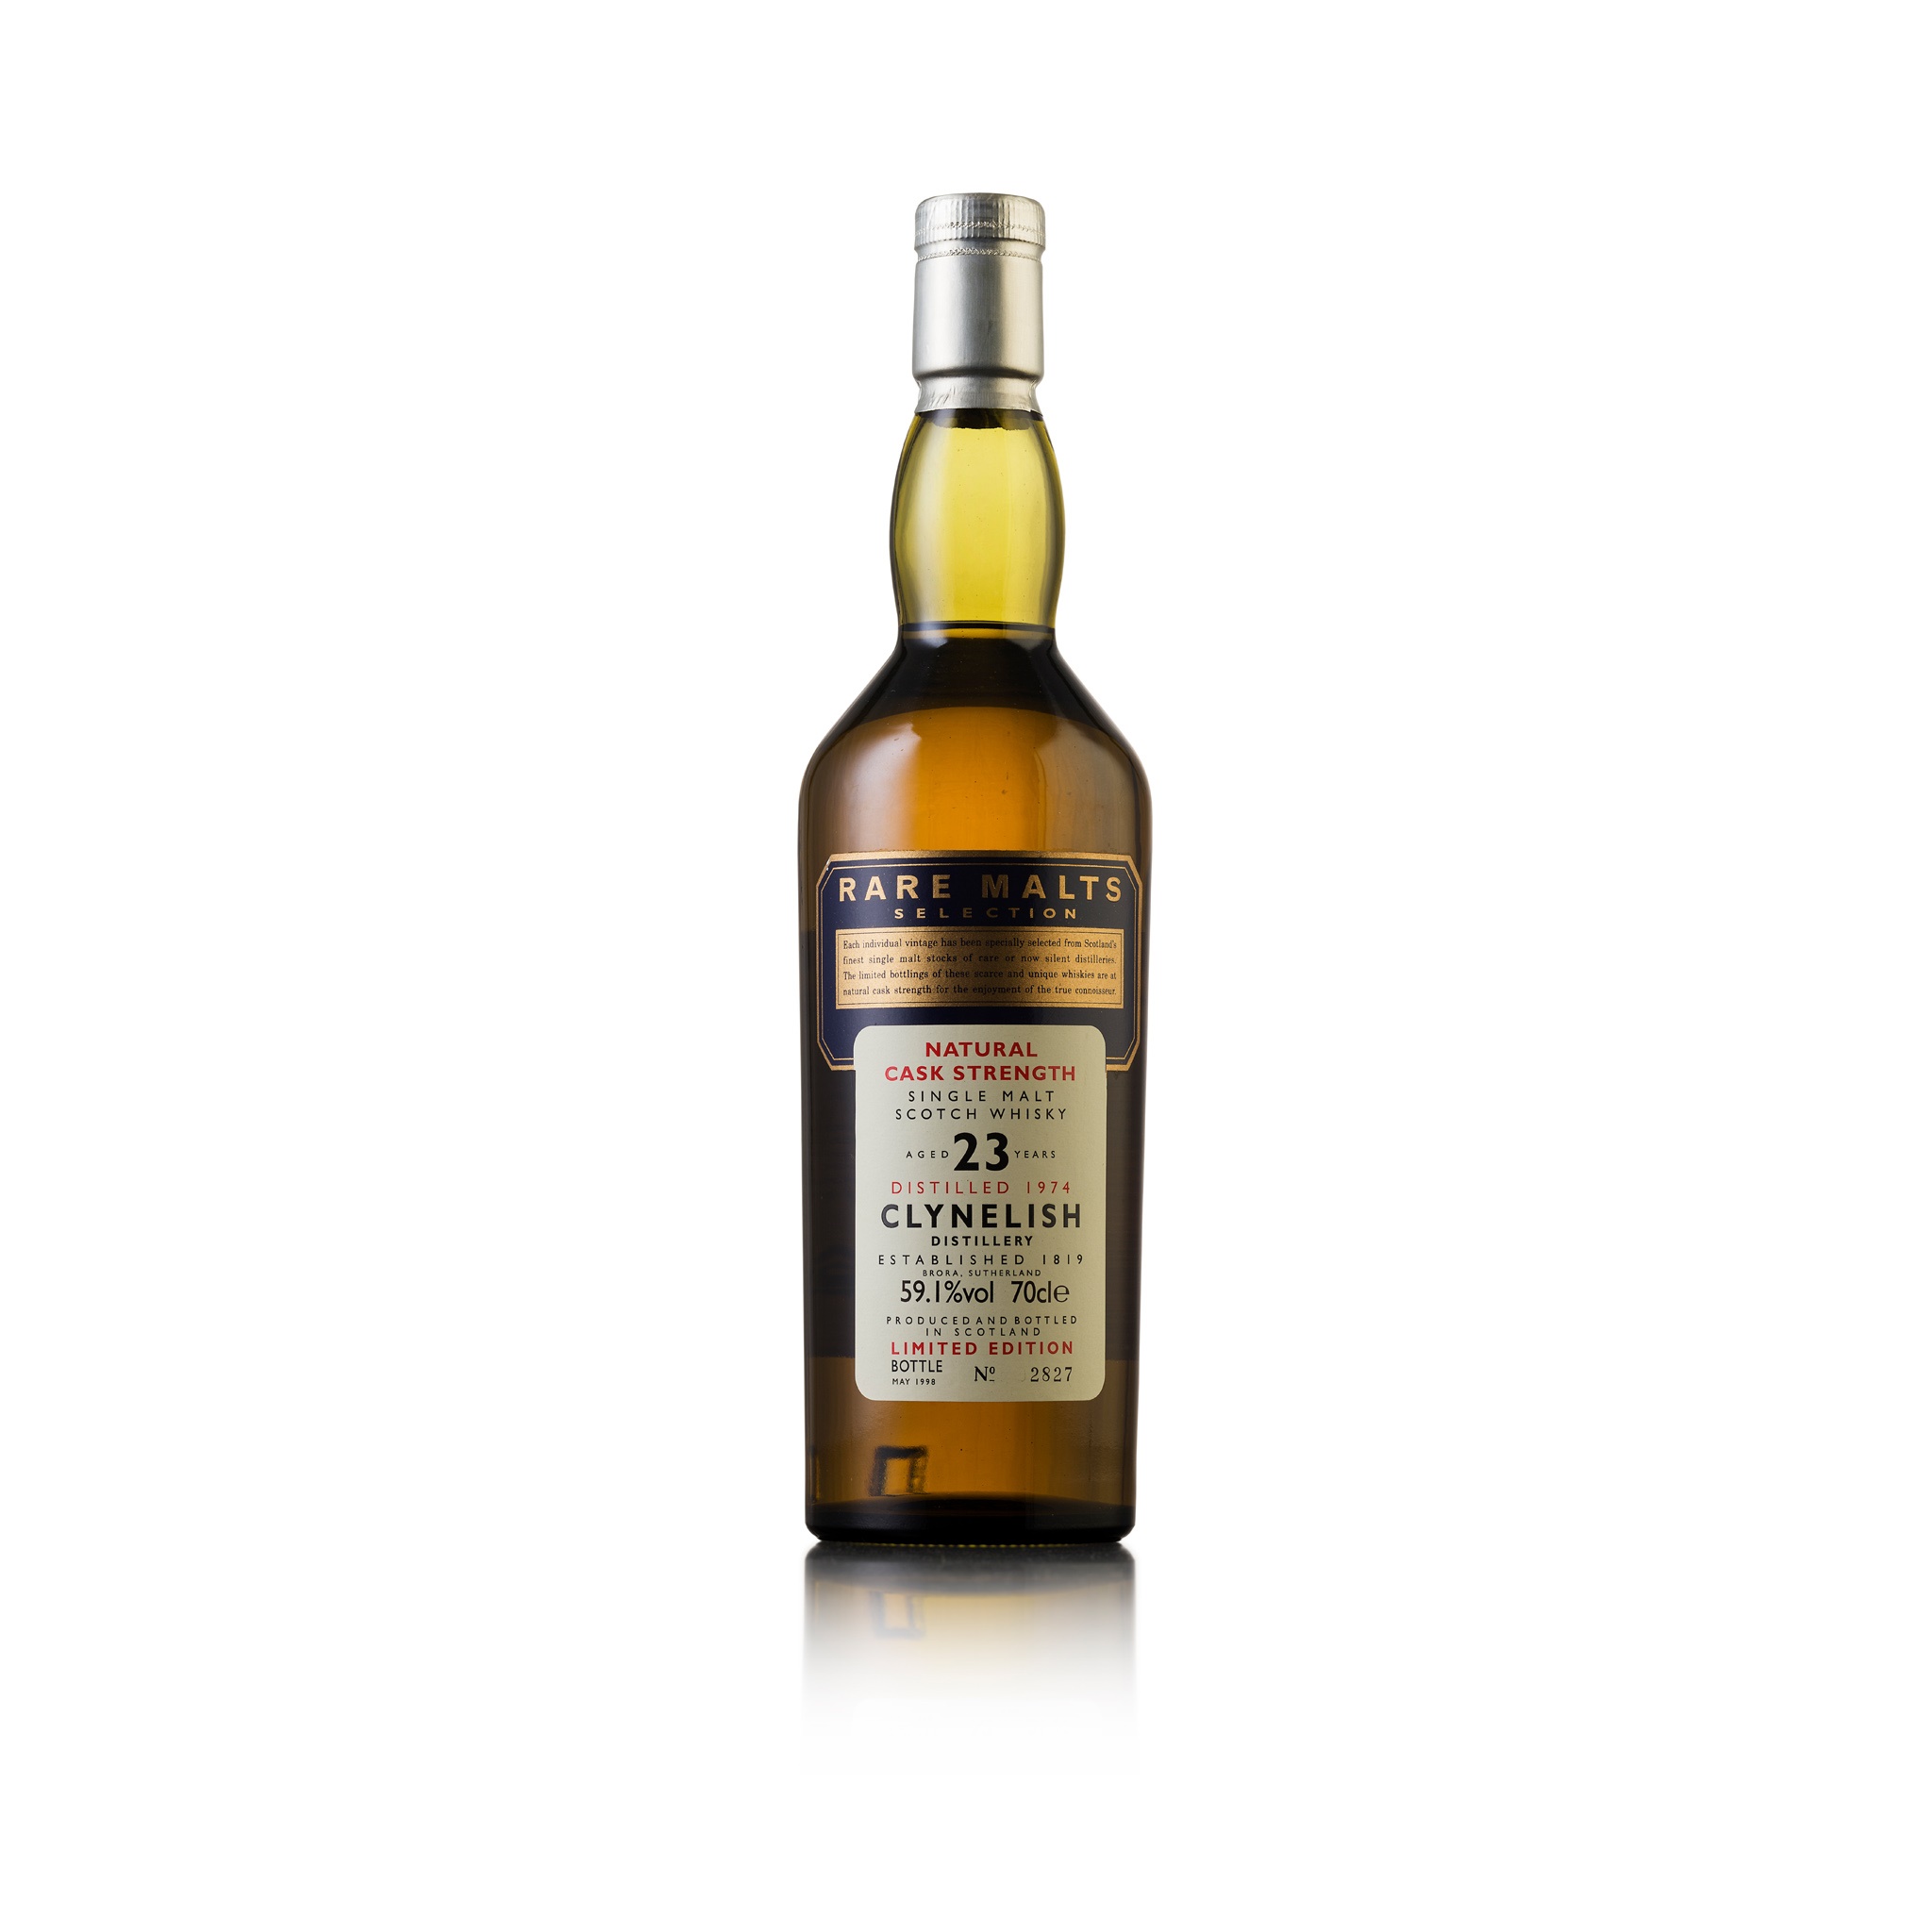 CLYNELISH 1974 23 YEAR OLD - RARE MALTS SELECTION limited edition bottled in May 1998, bottle number